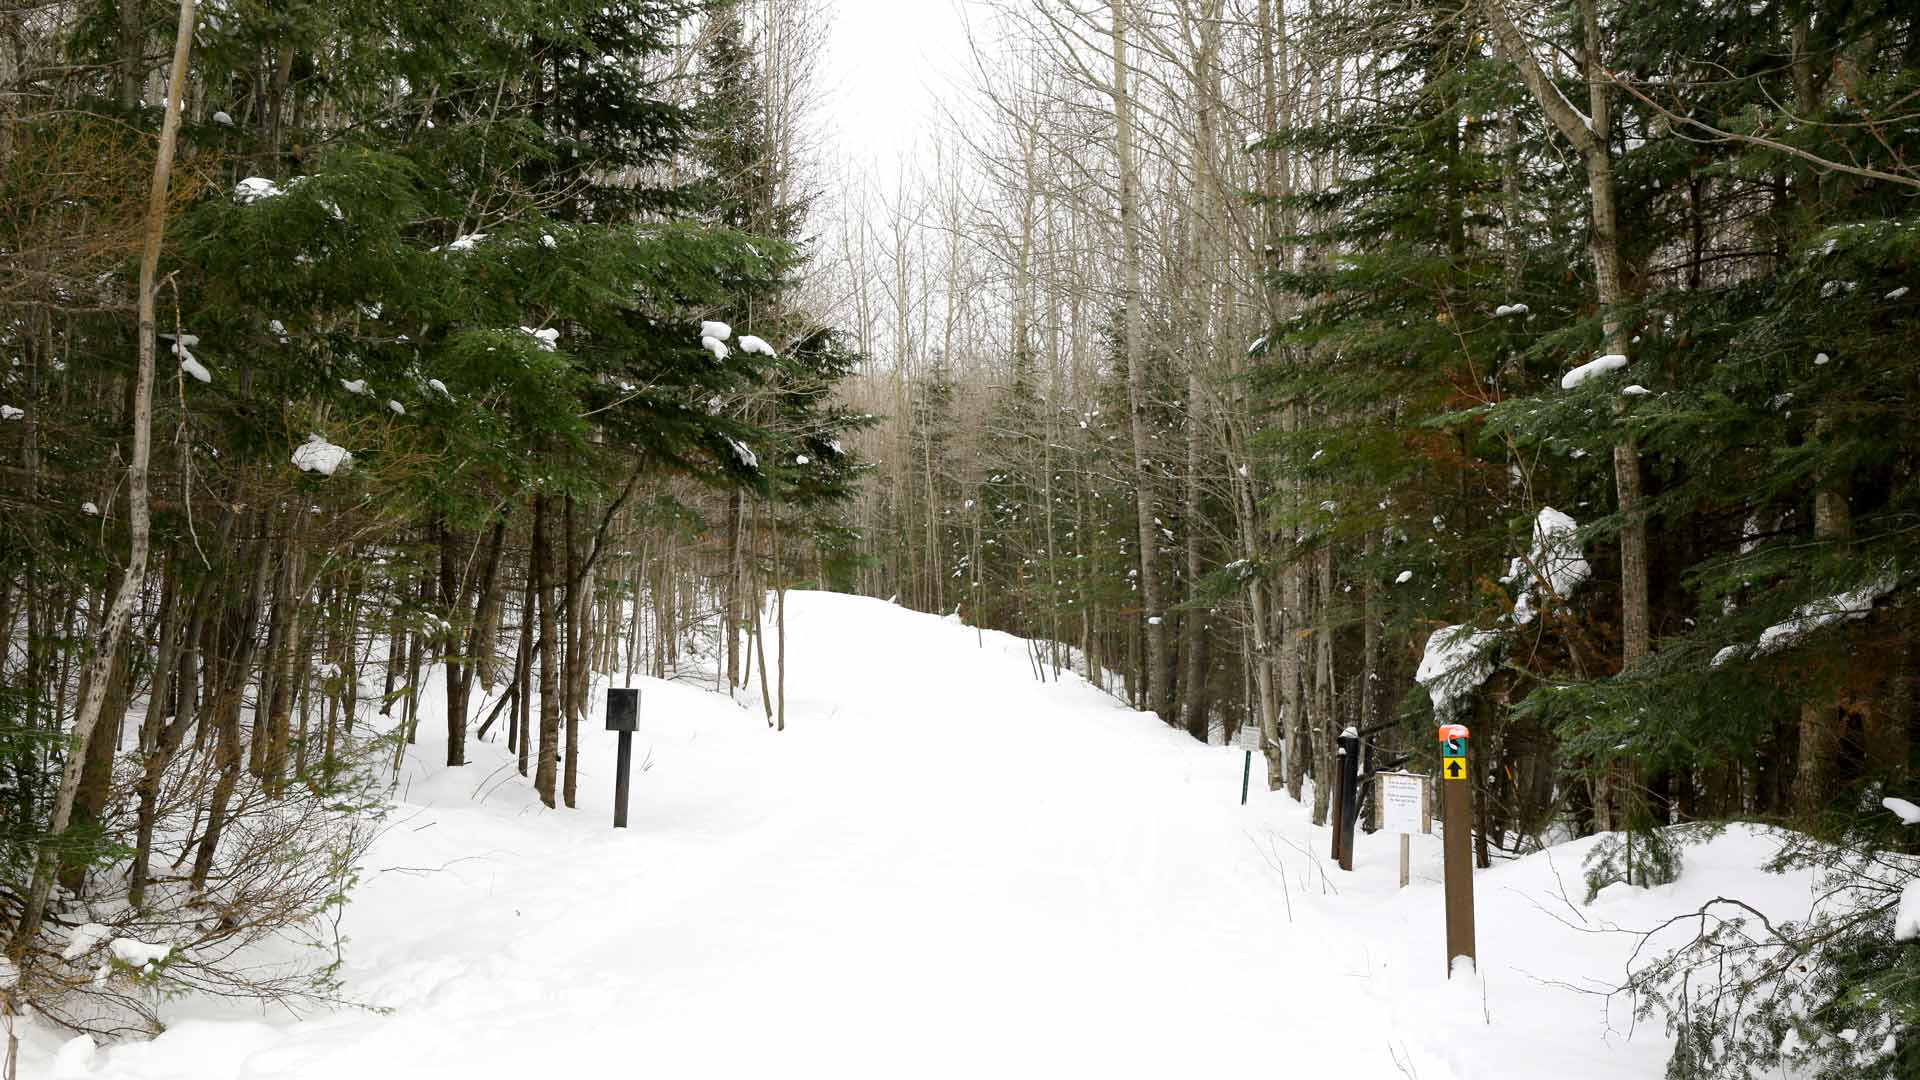 Winter path through the woods of Catherine Wolter Wilderness Area in Vilas County, Wisconsin